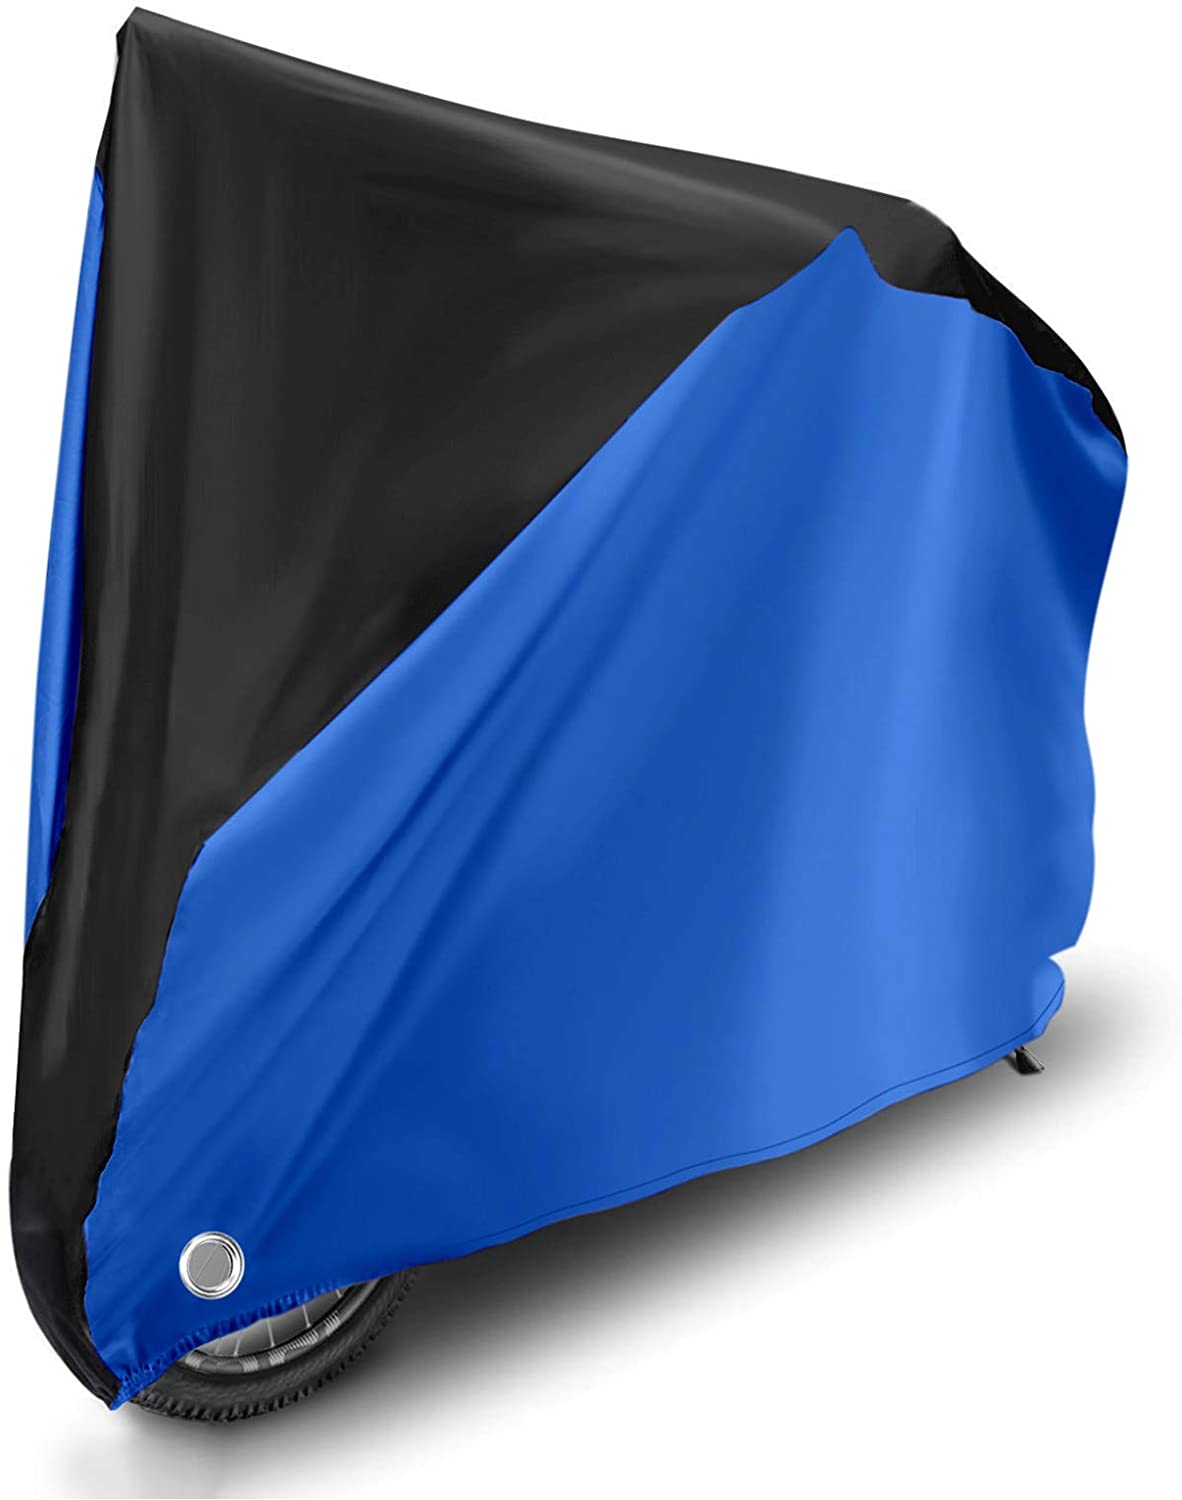 Roctee Double-Stitched Waterproof Bike Cover